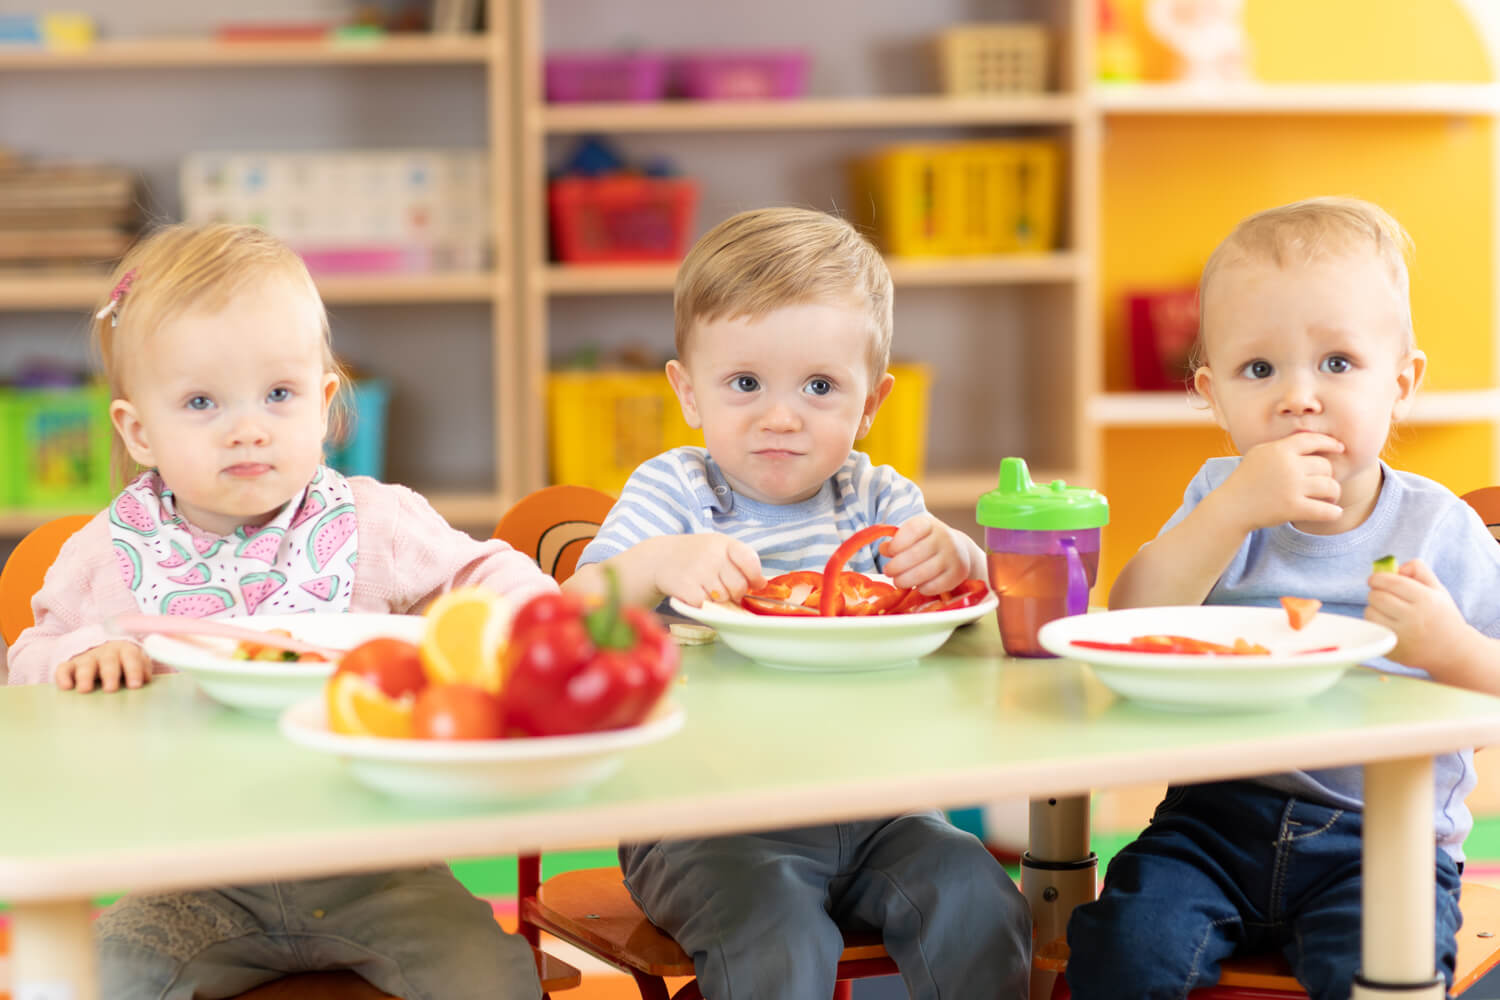 Healthy Baby Food Ideas When Leaving Your Baby in Daycare